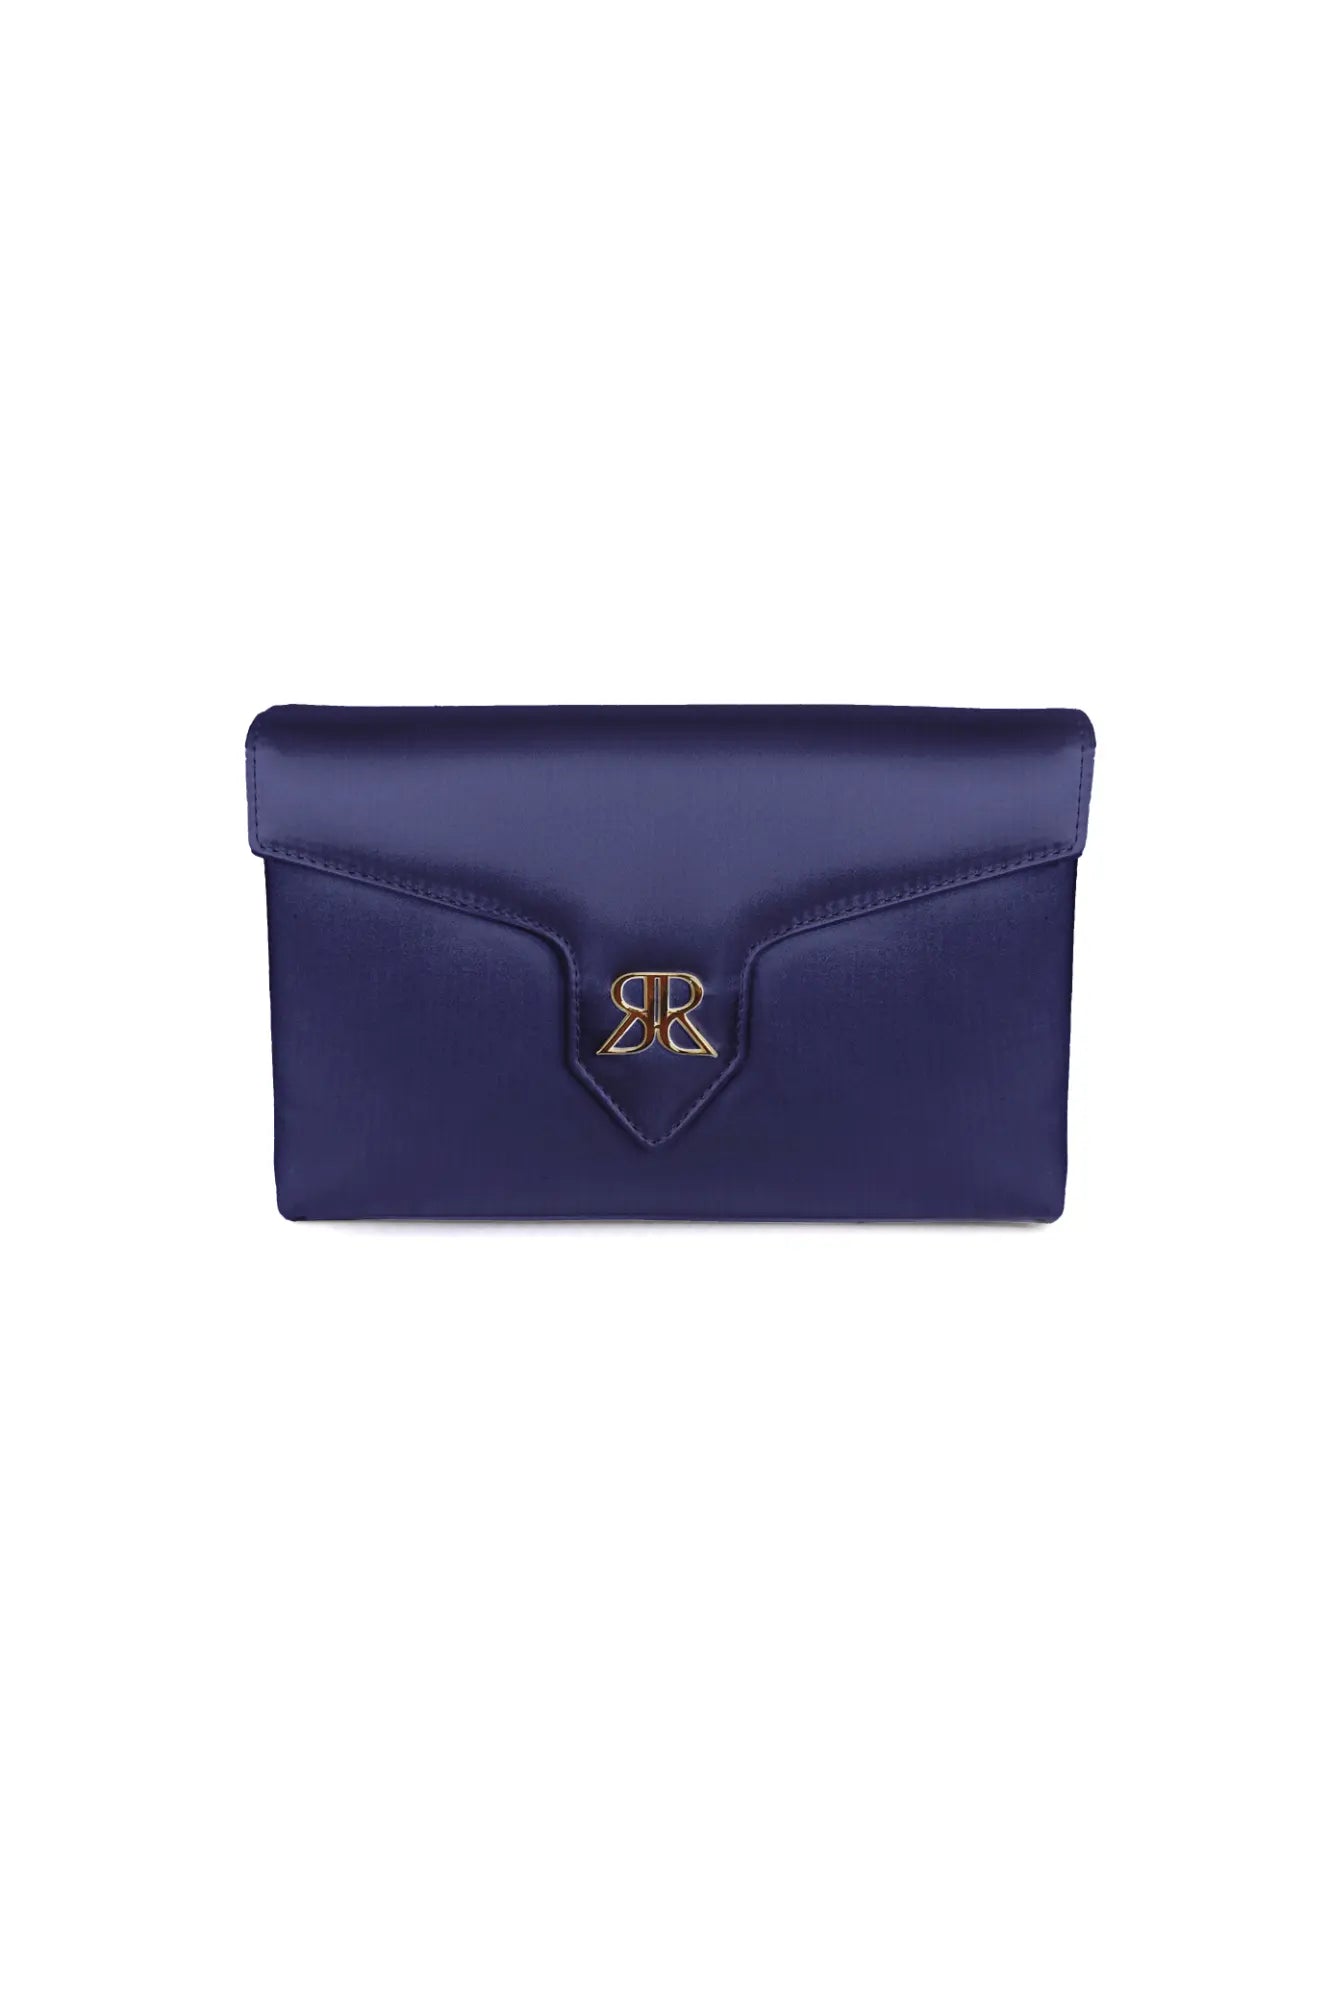 The Bella Rosa Collection Love Note Envelope Clutch Navy with gold monogram emblem on white background.